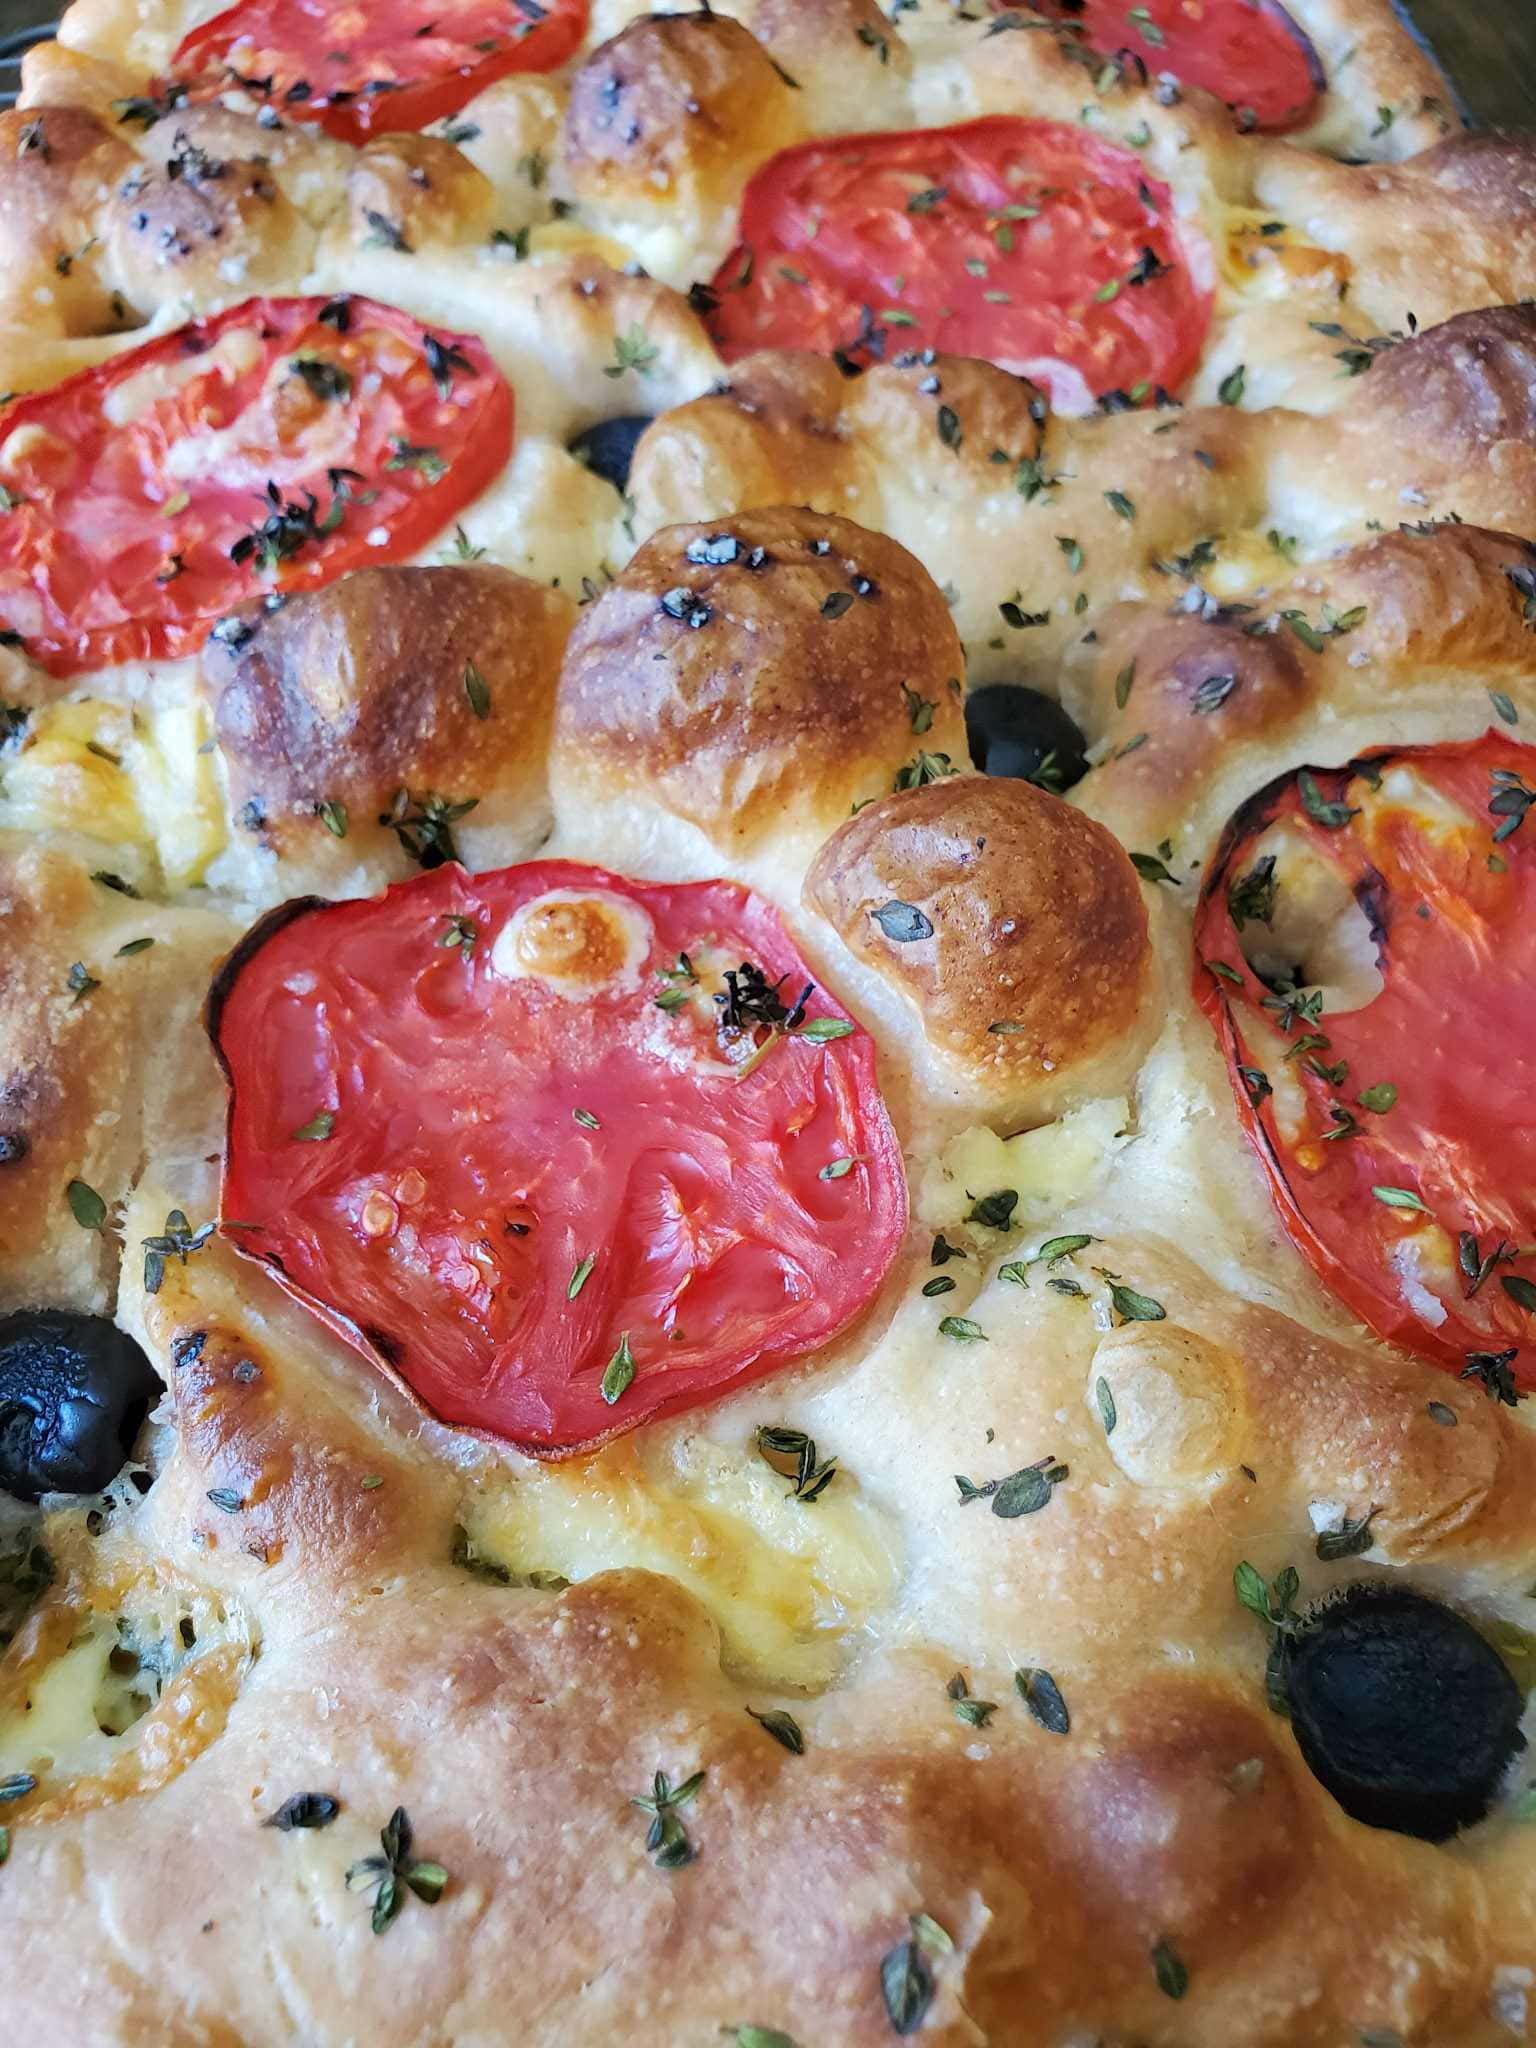 A close up of baked sourdough focaccia, with a light brown bubbly surface, flecks of little green thyme leaves, slices of round tomatoes, and black olives pressed into the dimples on top of the dough.